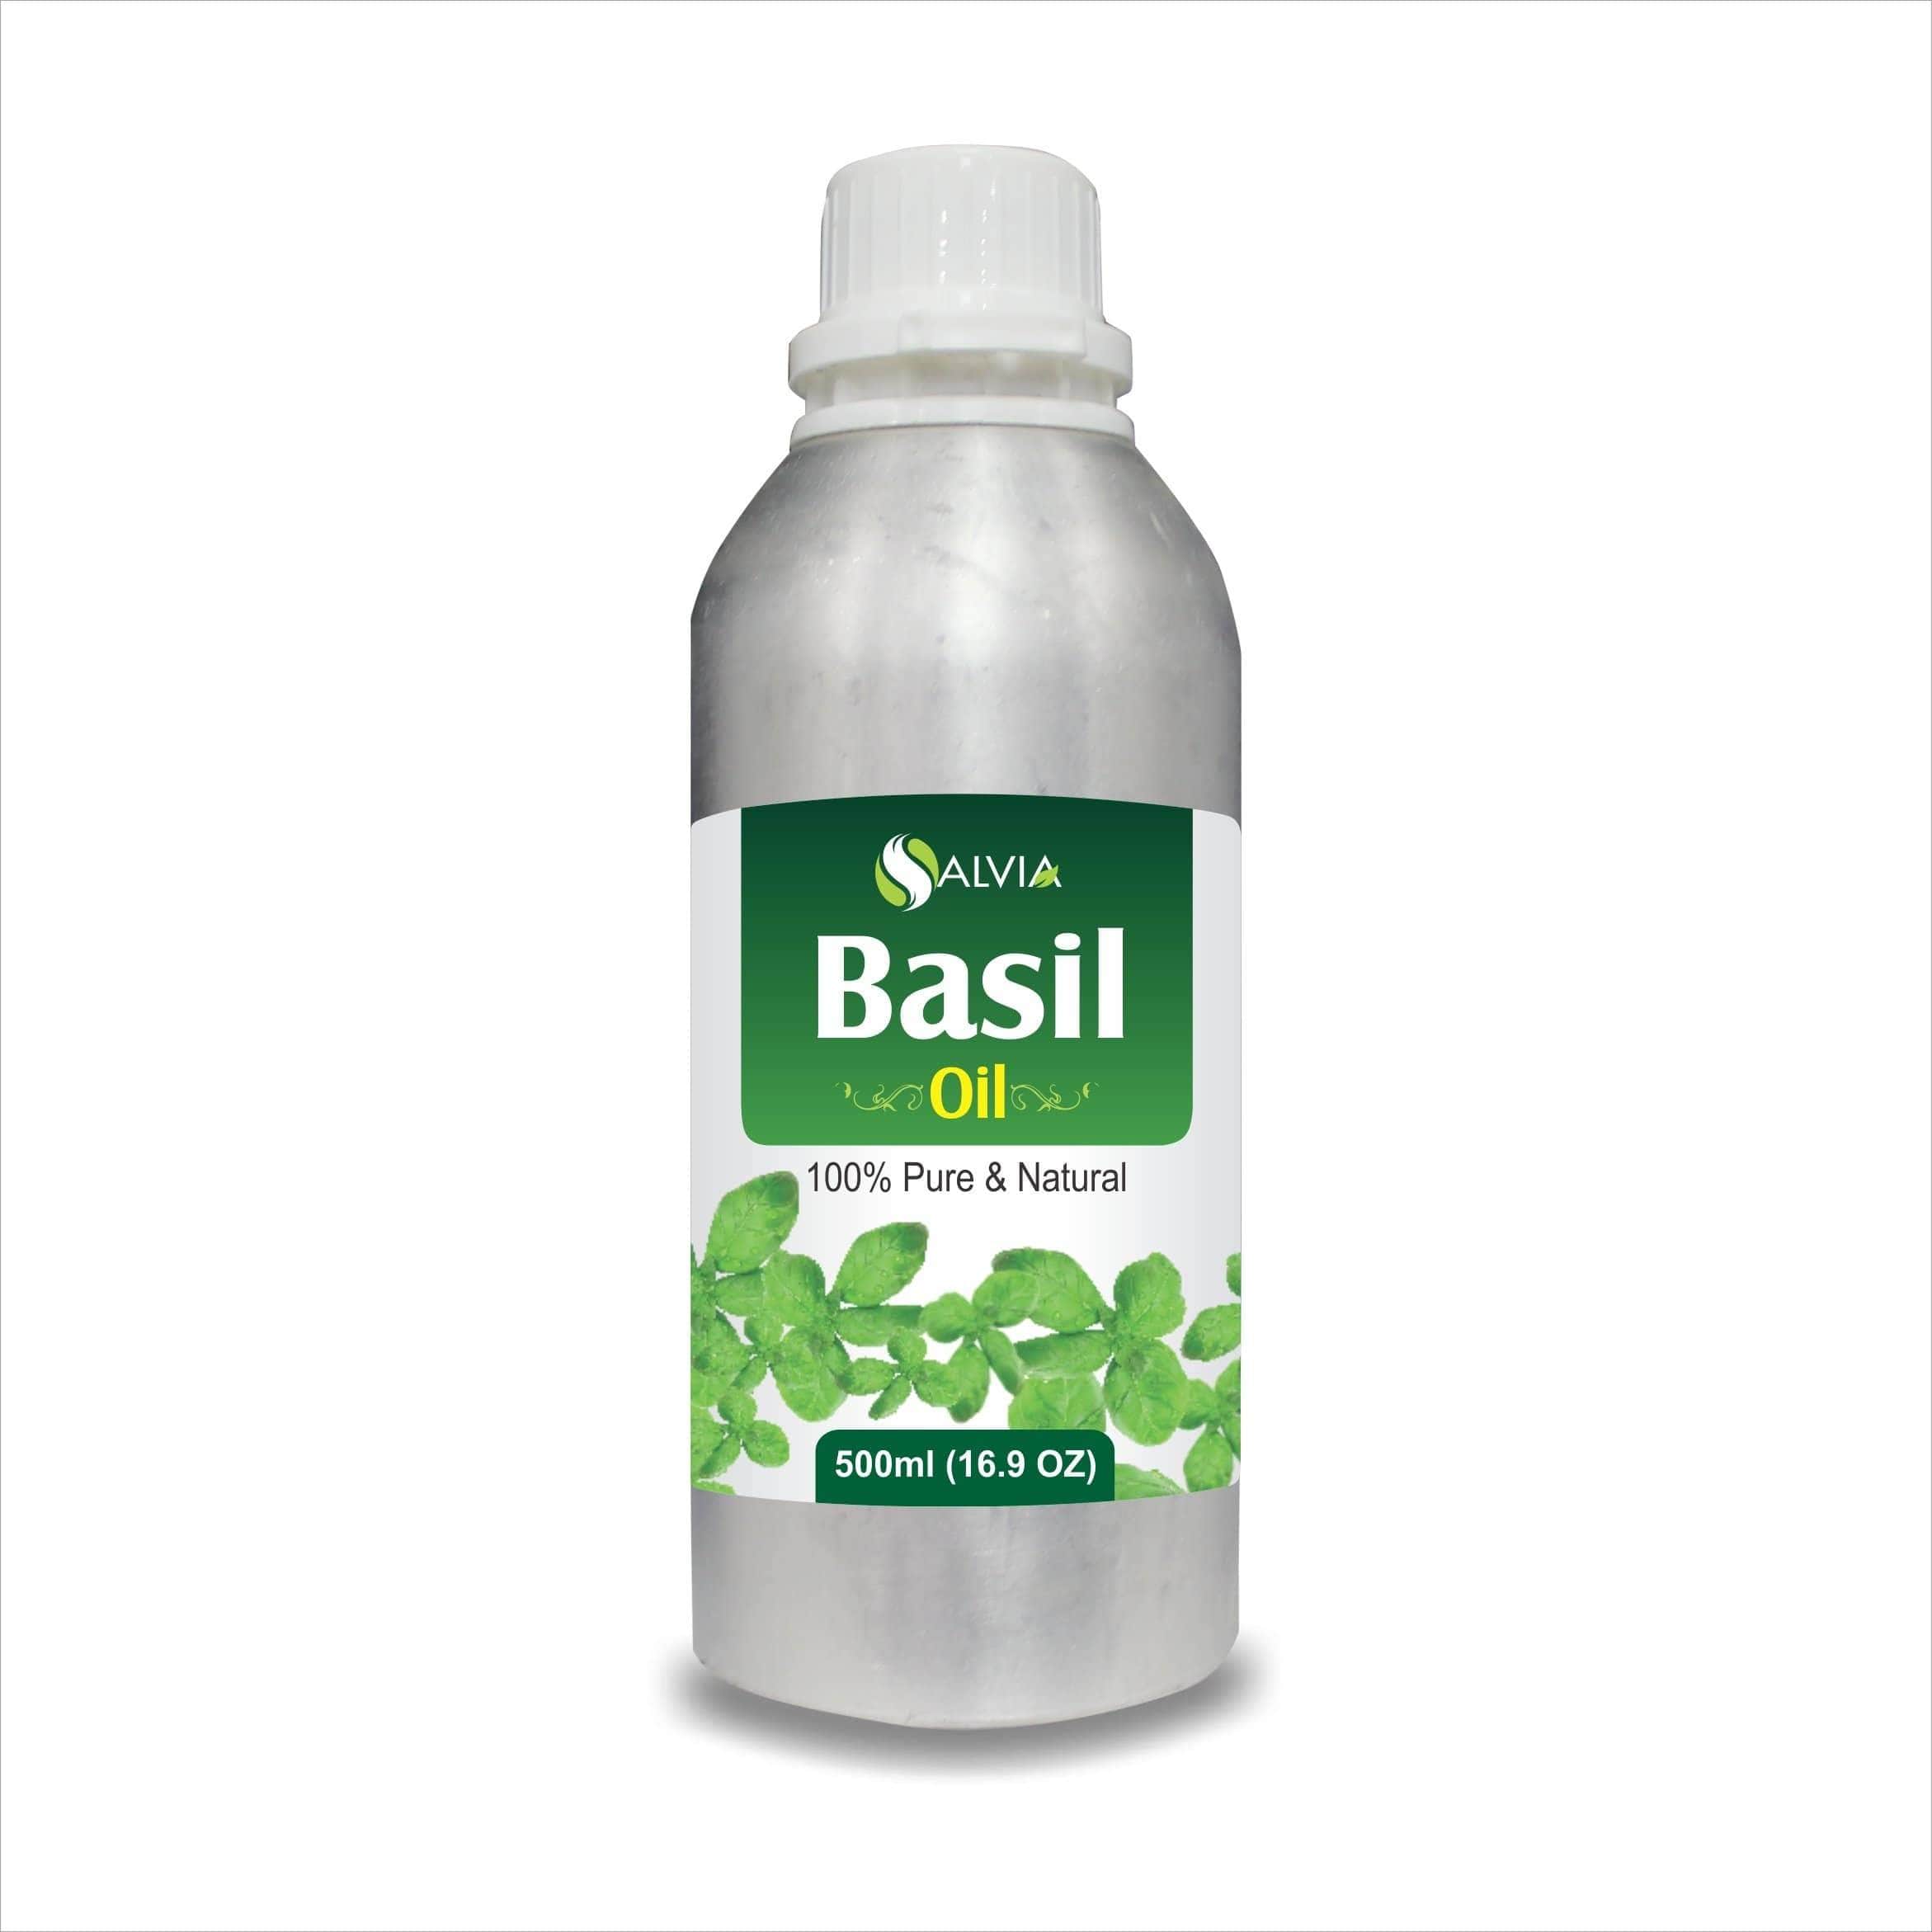  how to use basil essential oil on face